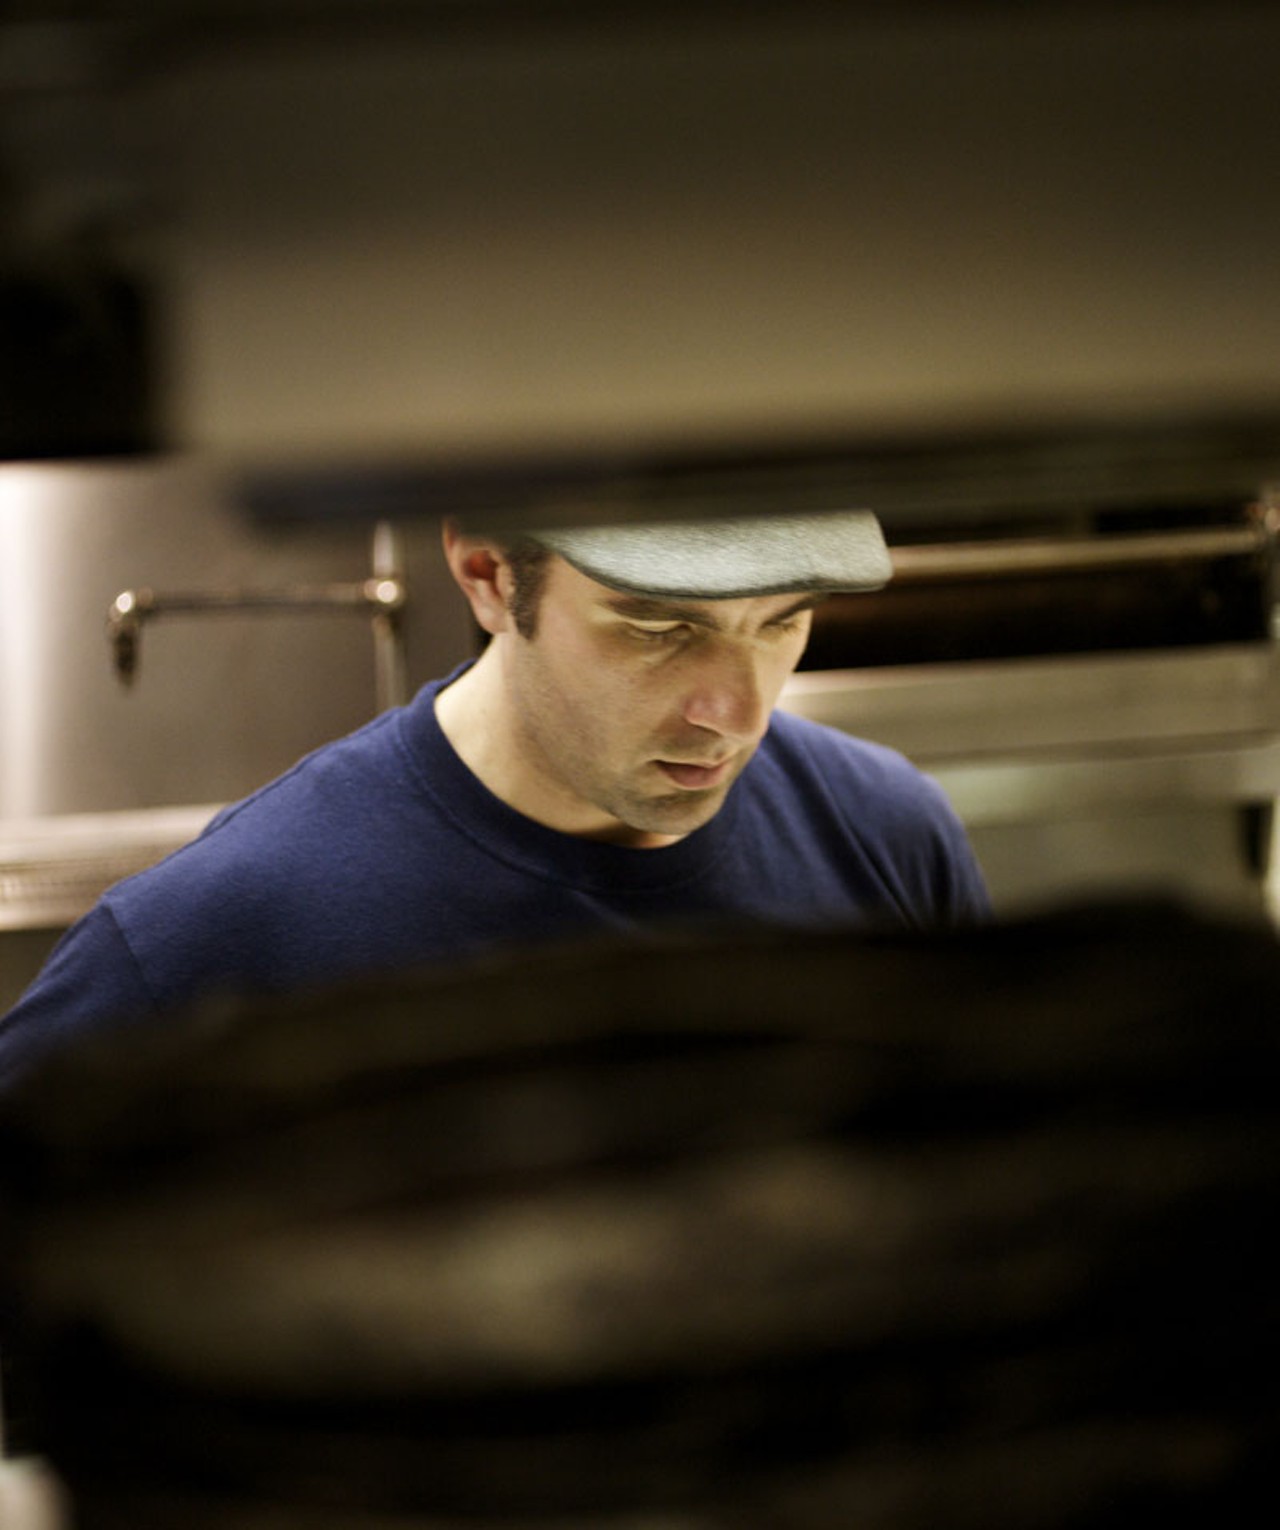 A peek at Executive Chef Josh Galliano in the kitchen of Monarch.